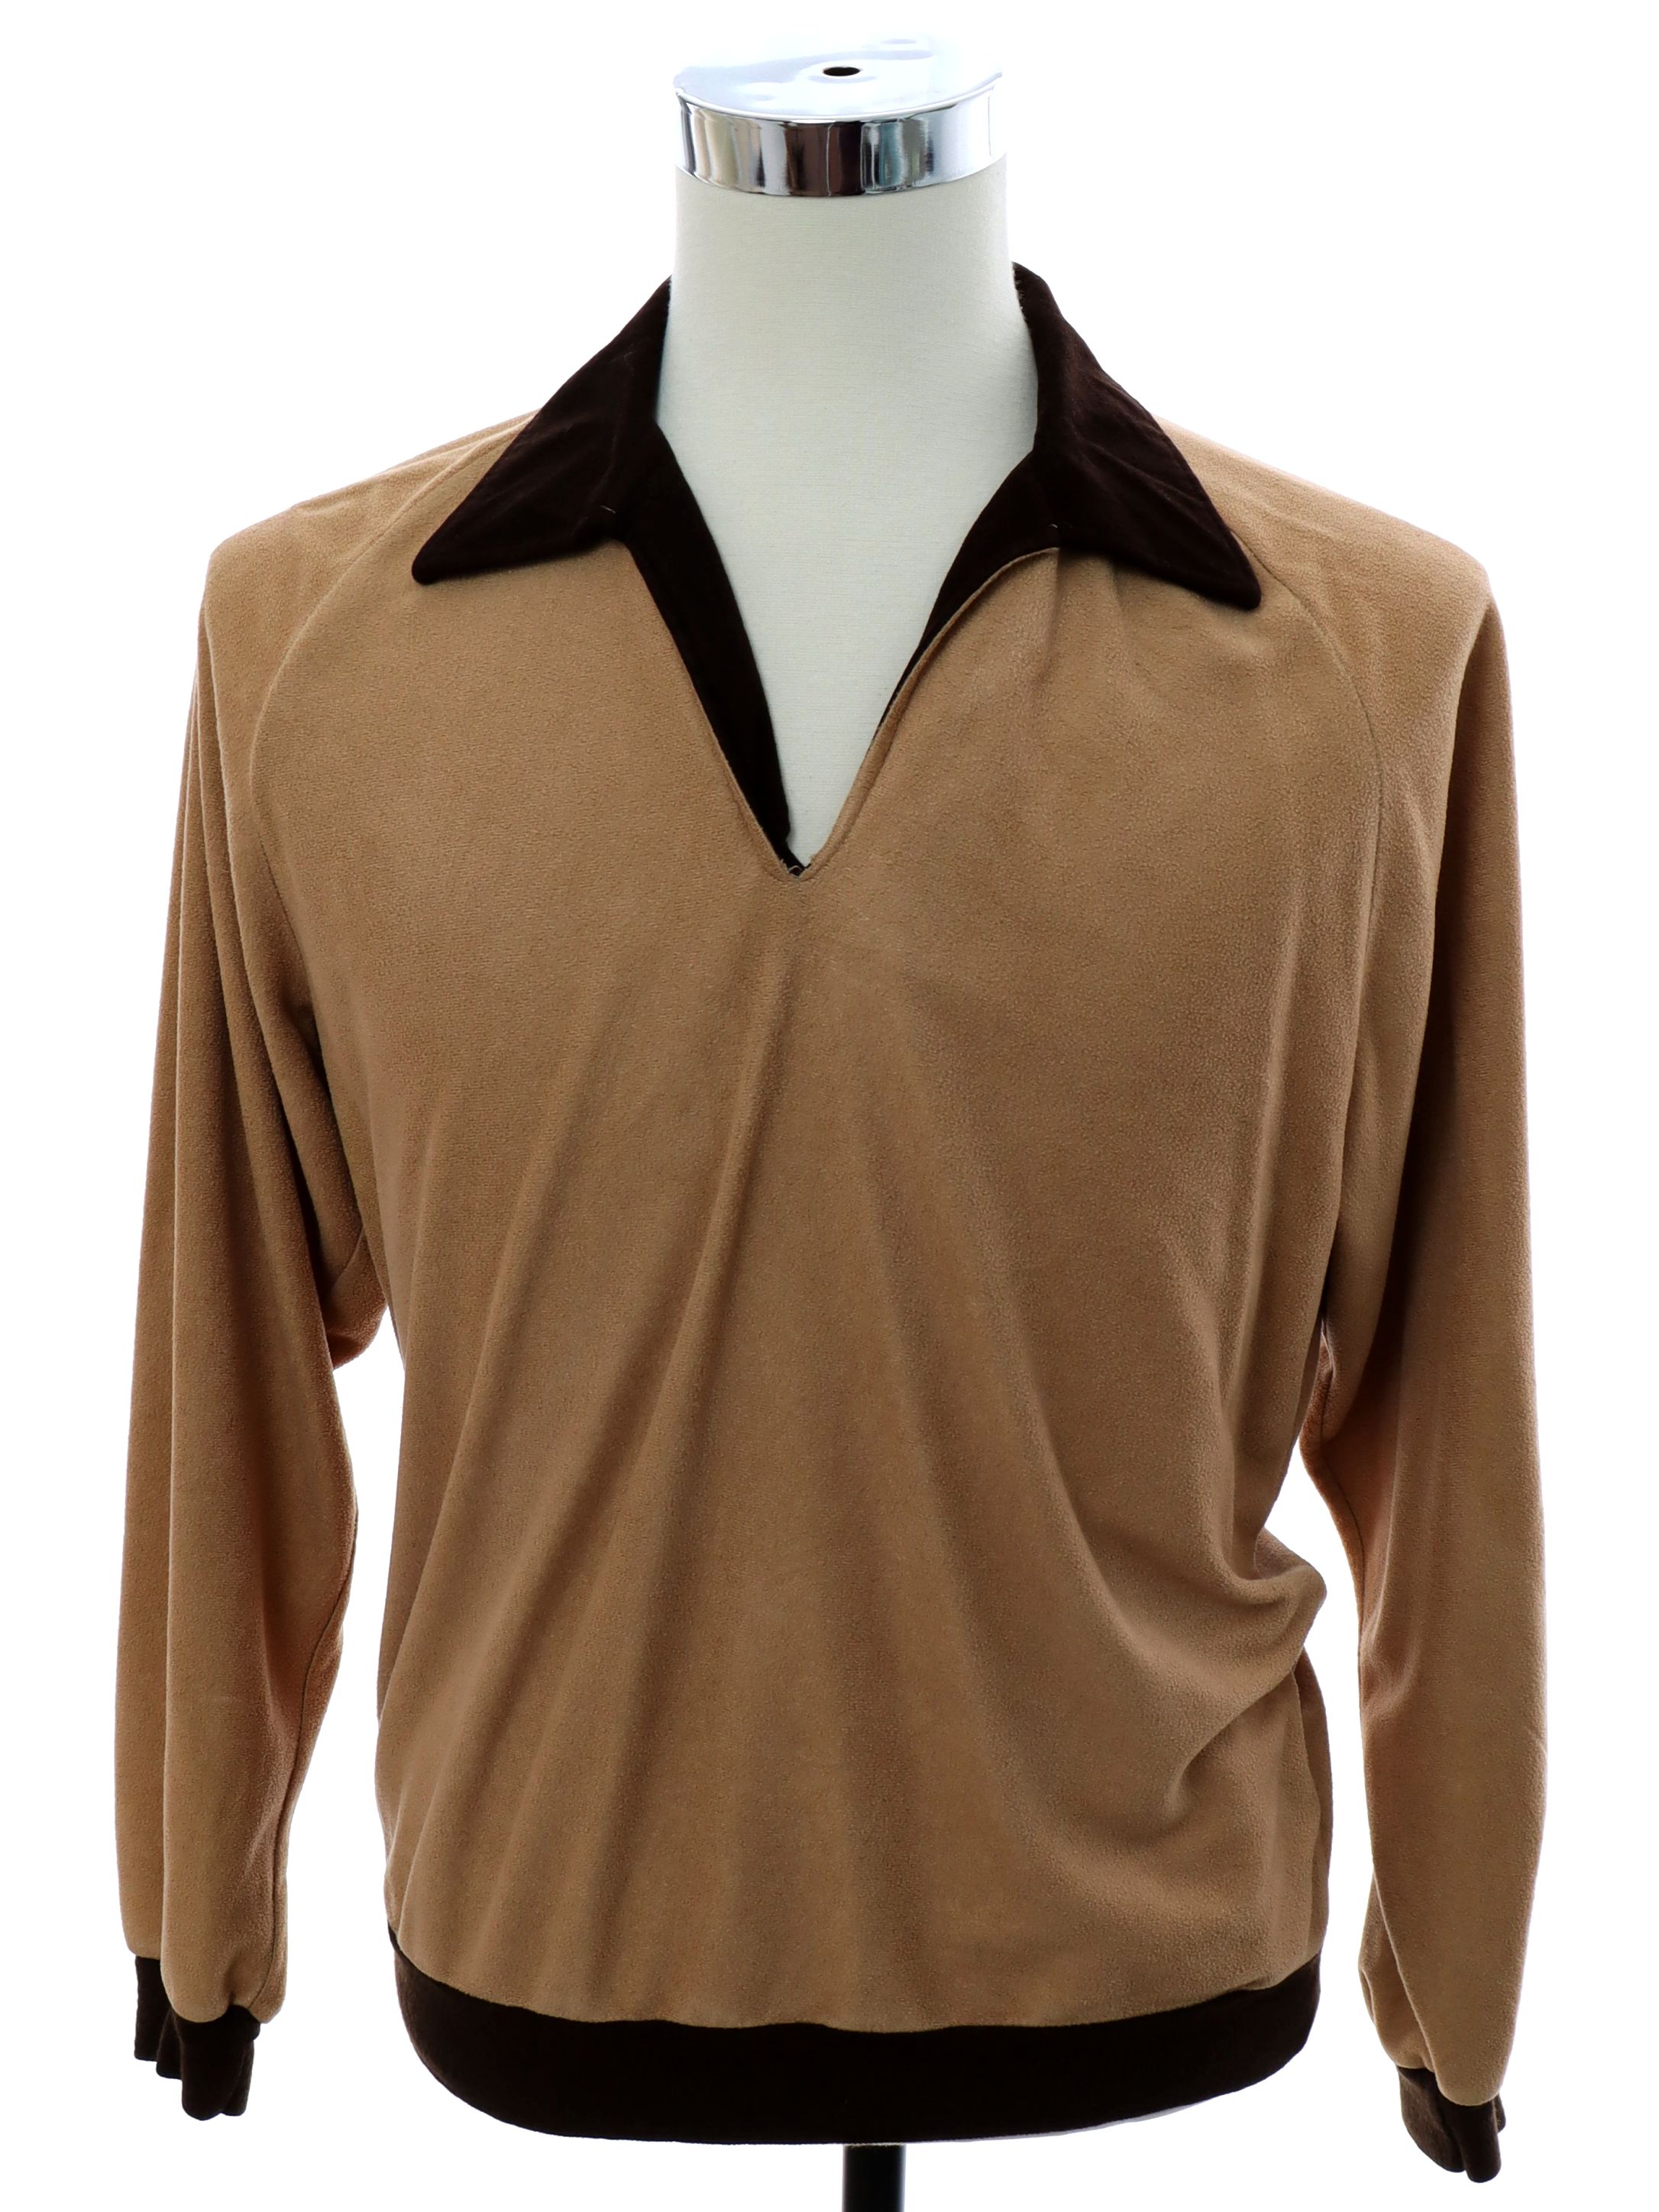 1970's Vintage Sportswear by Country Touch Velour Shirt: Late 70s - Sportswear by Country Touch- Mens camel tan background nylon triacetate  blend ribbed knit cuff longsleeve pullover velour shirt with contrasting  brown collar